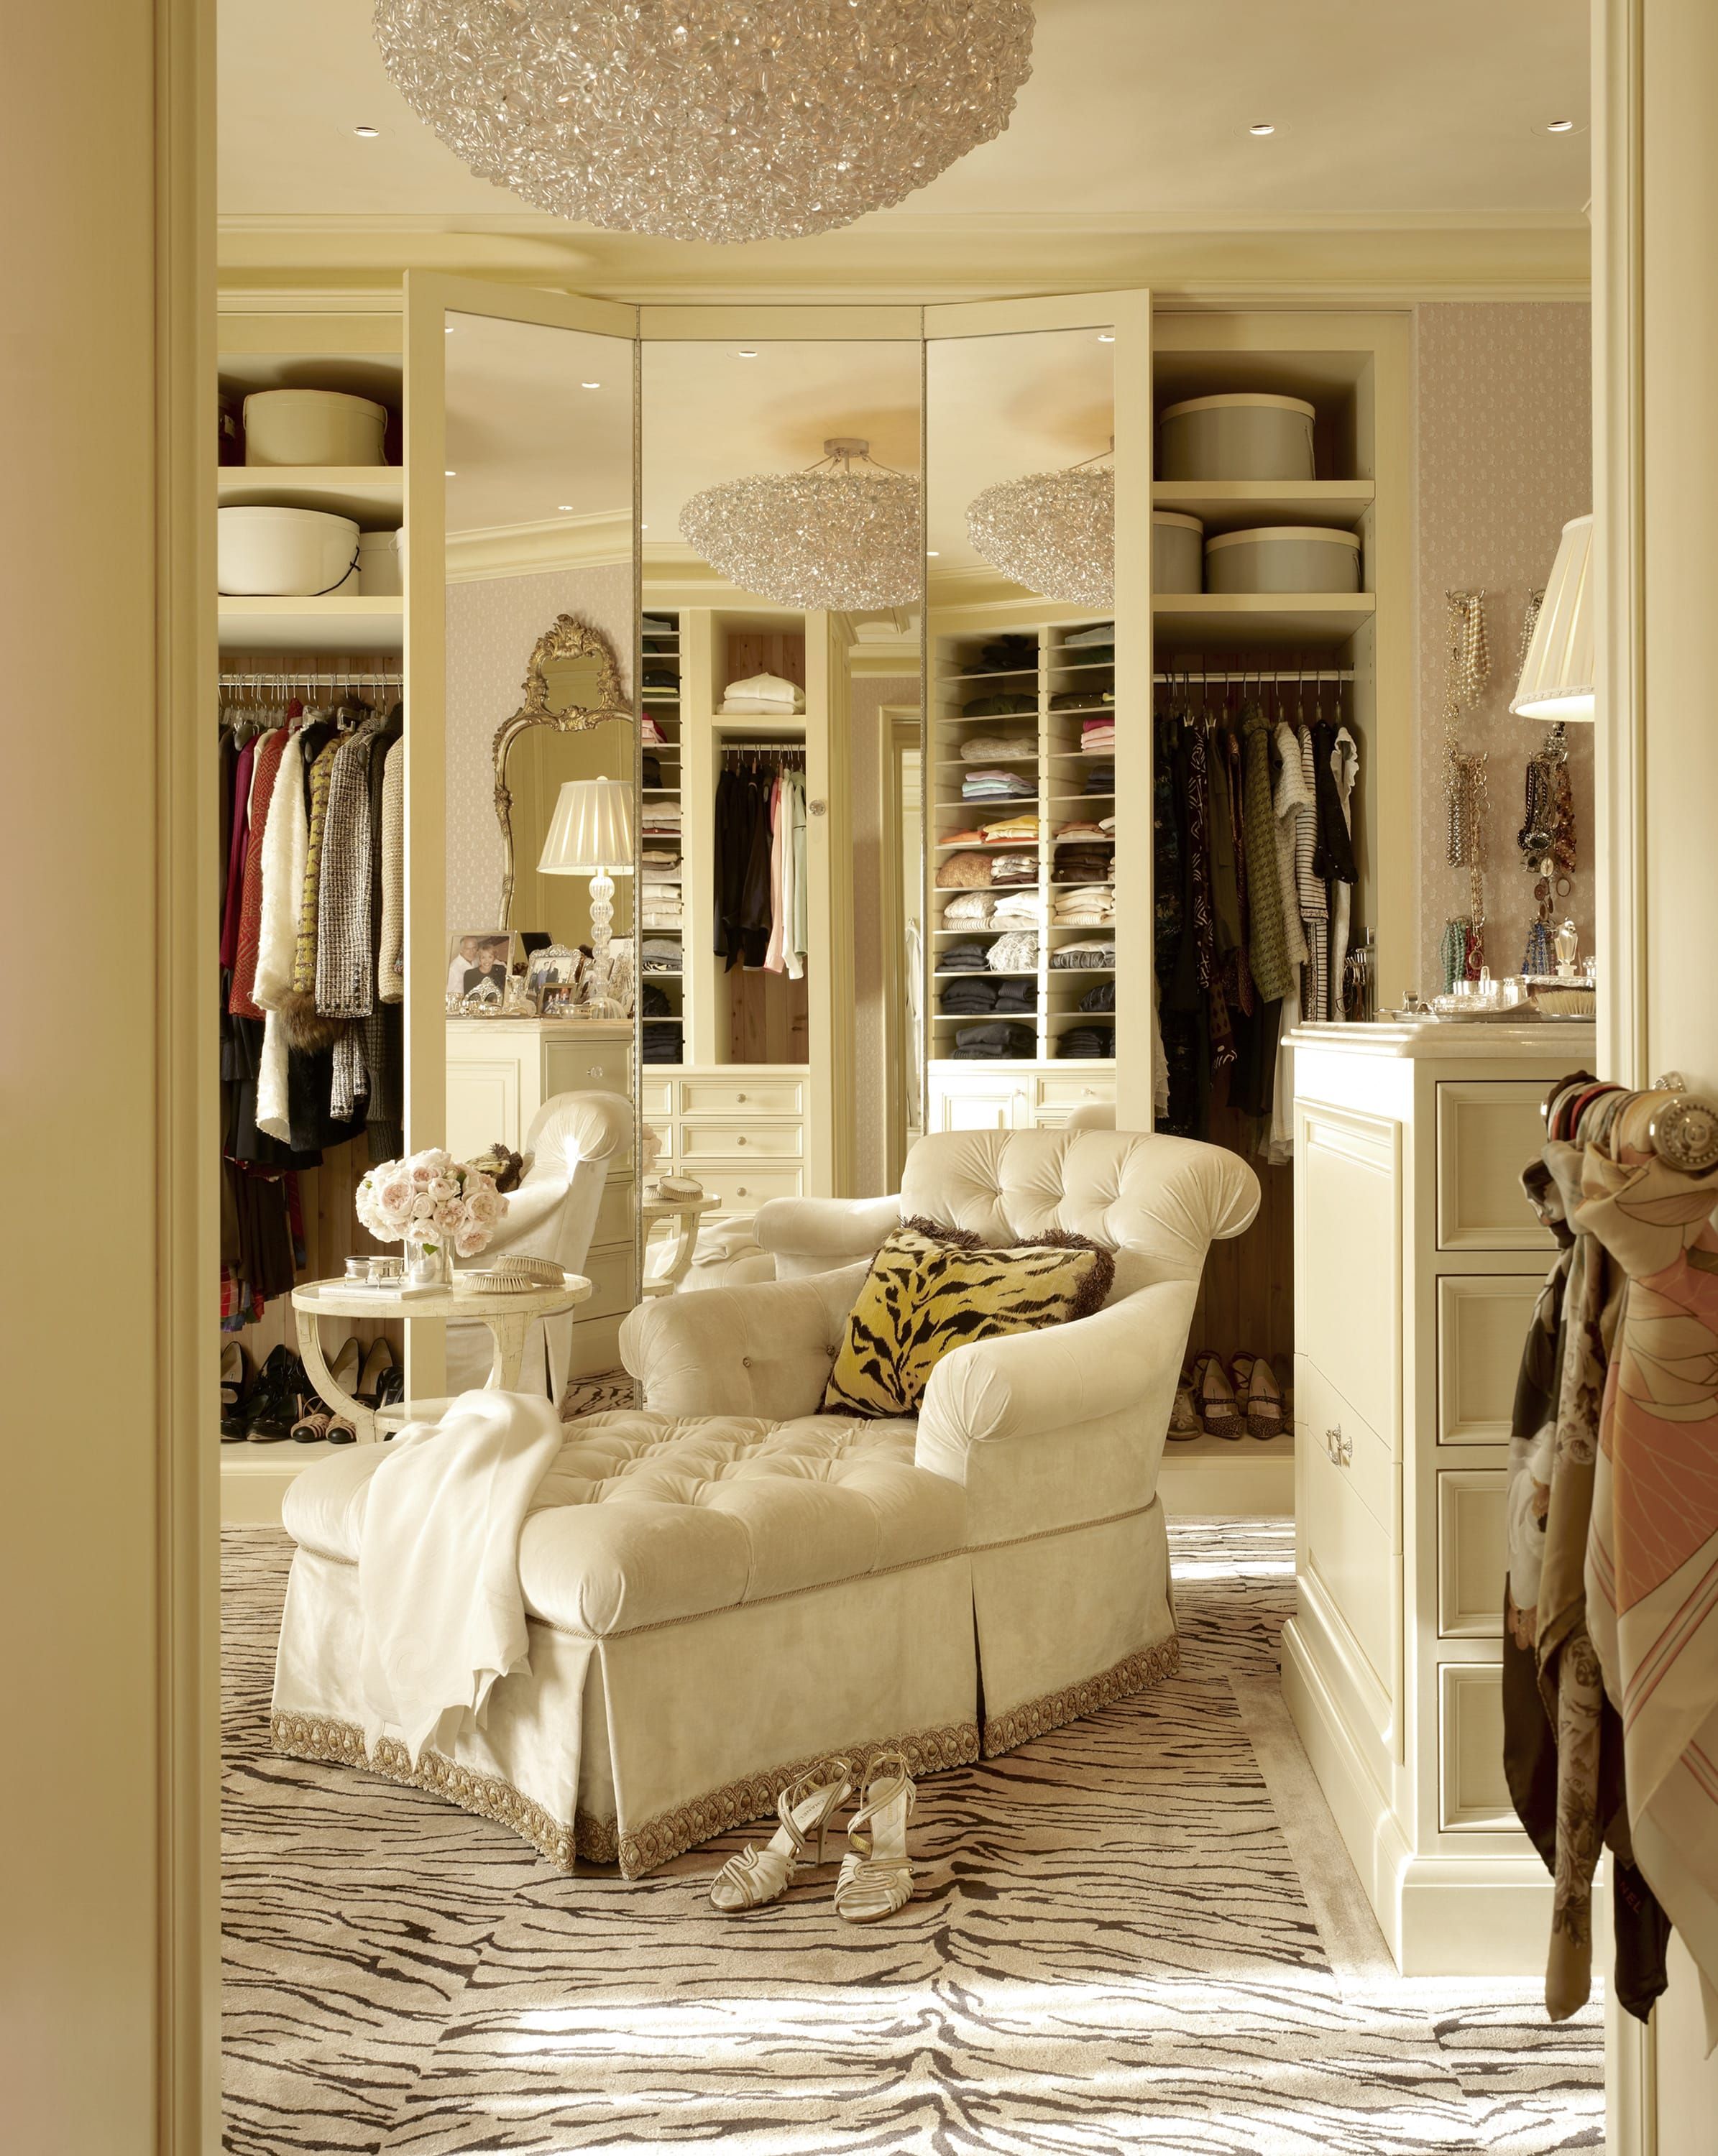 Dressing room in a 6,000-square-foot apartment with a traditional decor.